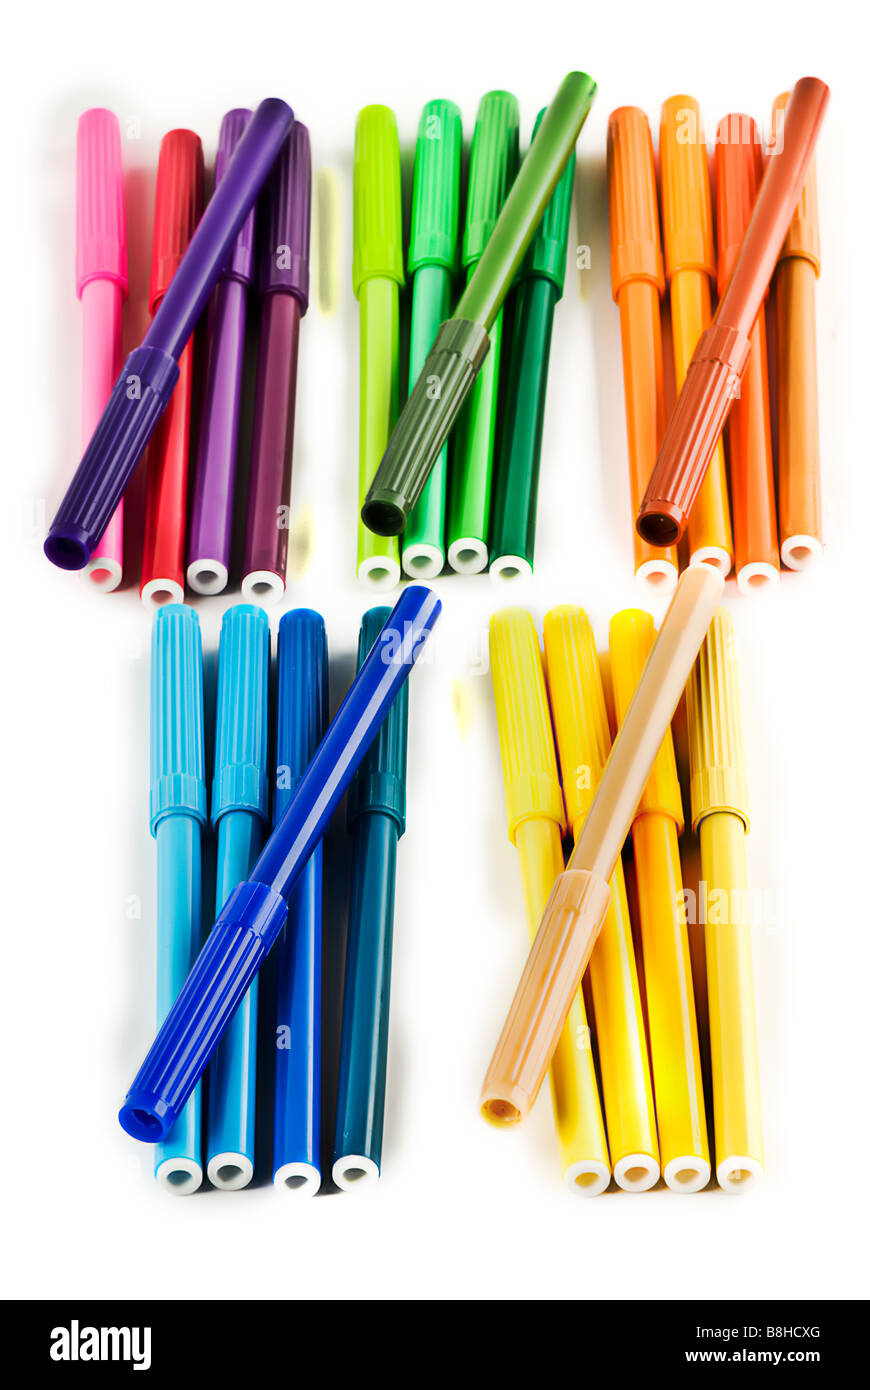 https://c8.alamy.com/comp/B8HCXG/5-piles-of-5-markers-each-pile-is-separated-by-color-blue-green-orange-B8HCXG.jpg